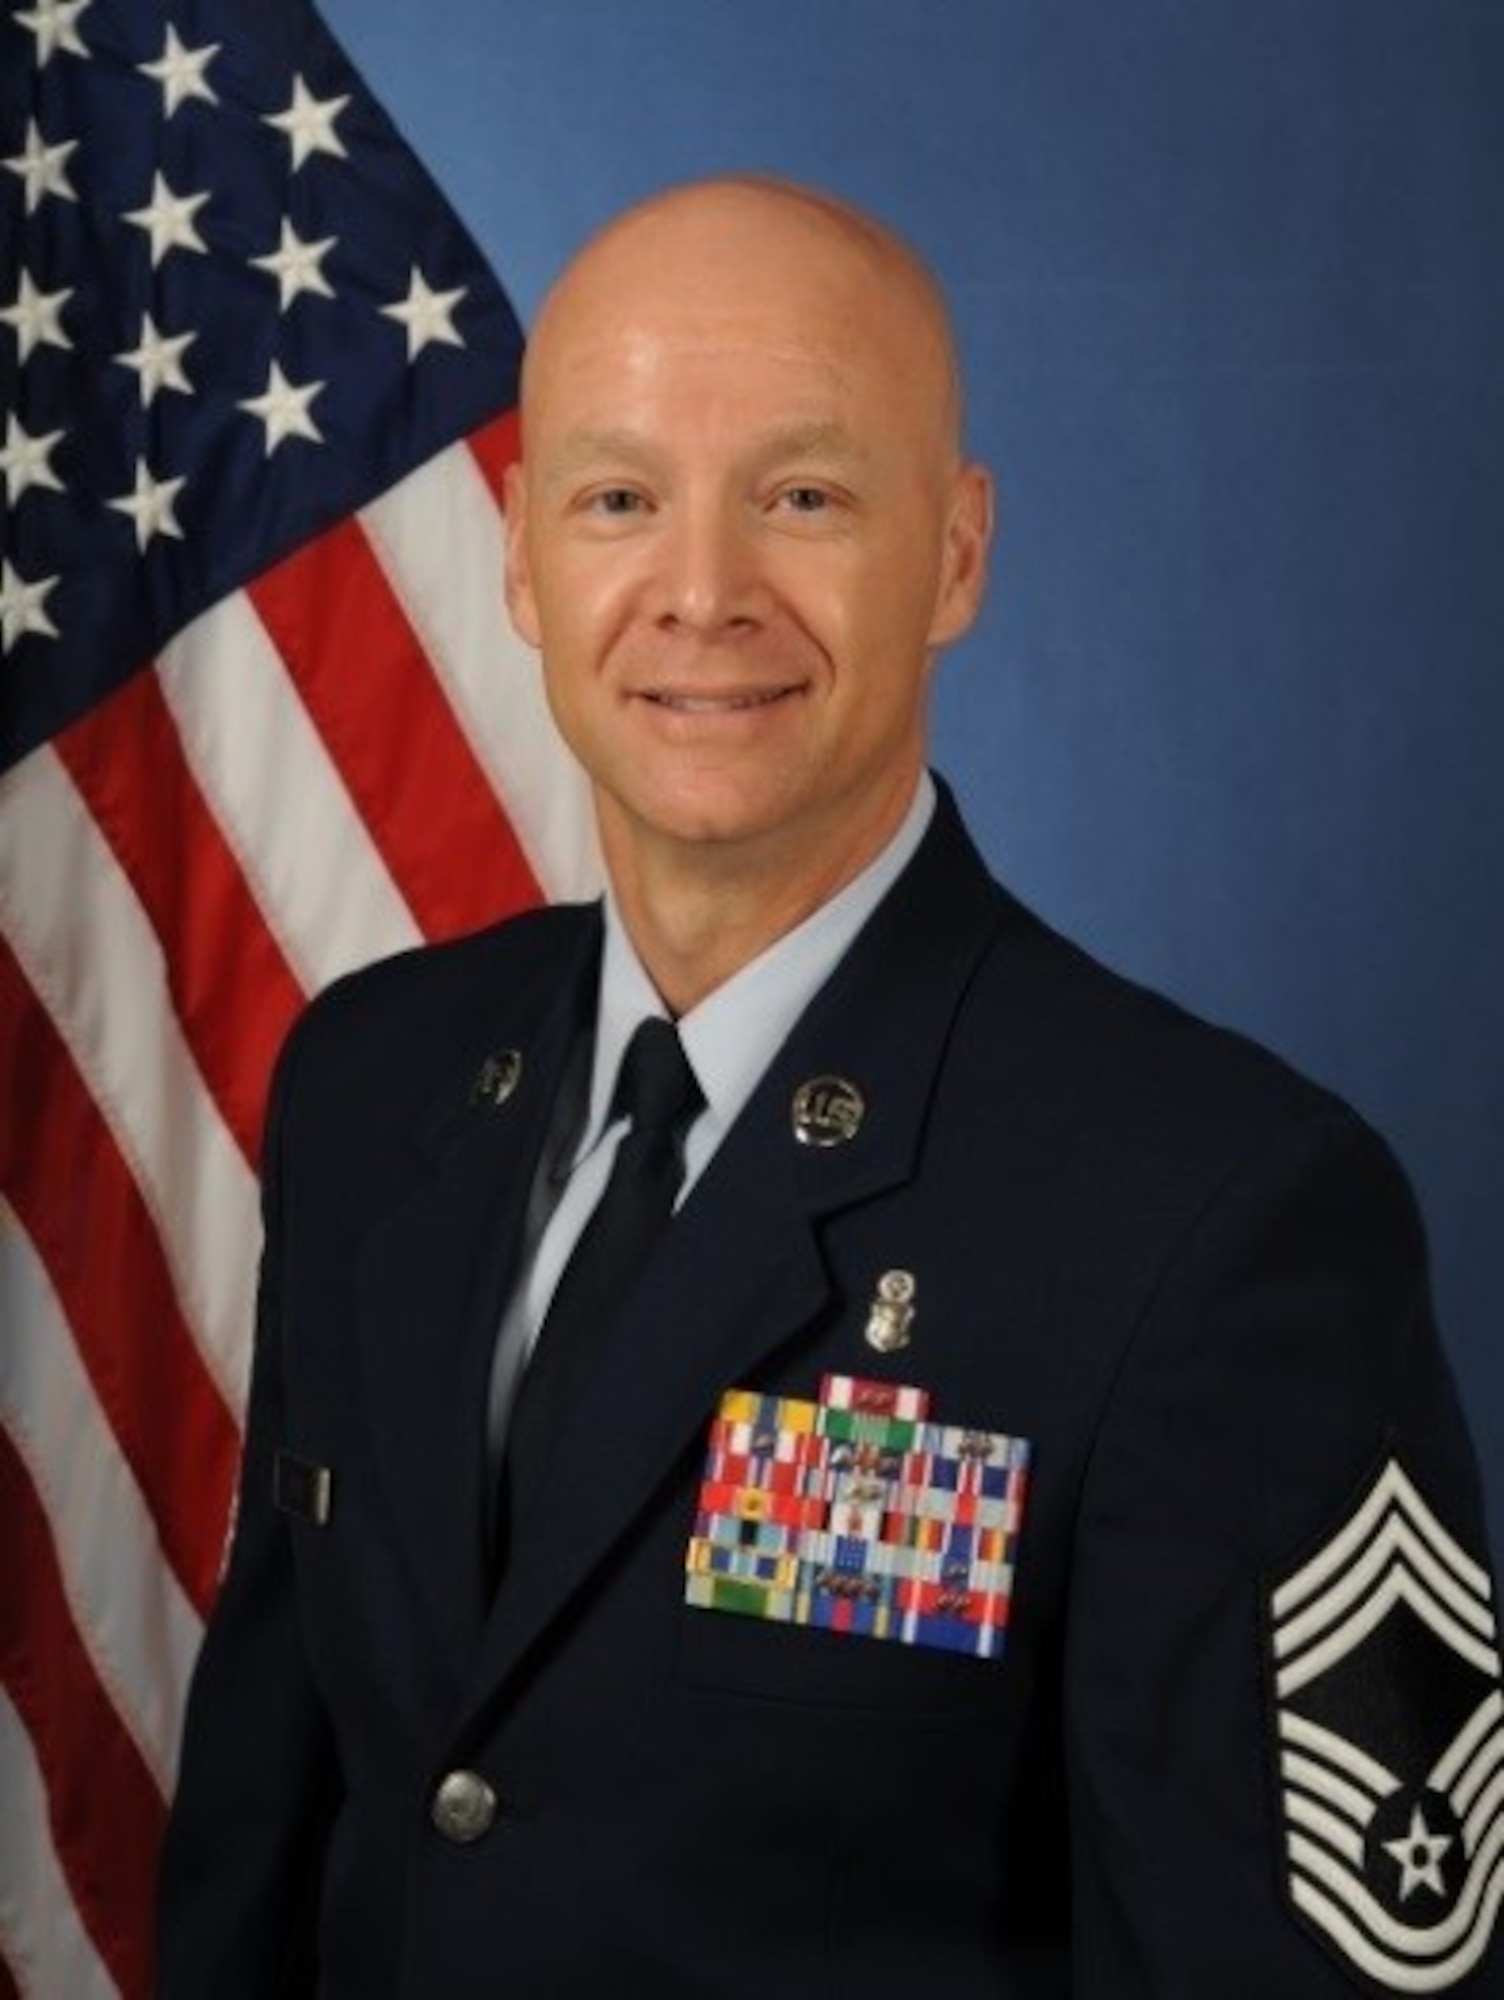 Chief Master Sgt. Mark Davis, 60th Medical Group, shares some insight on how to achieve success. (Courtesy Photo)